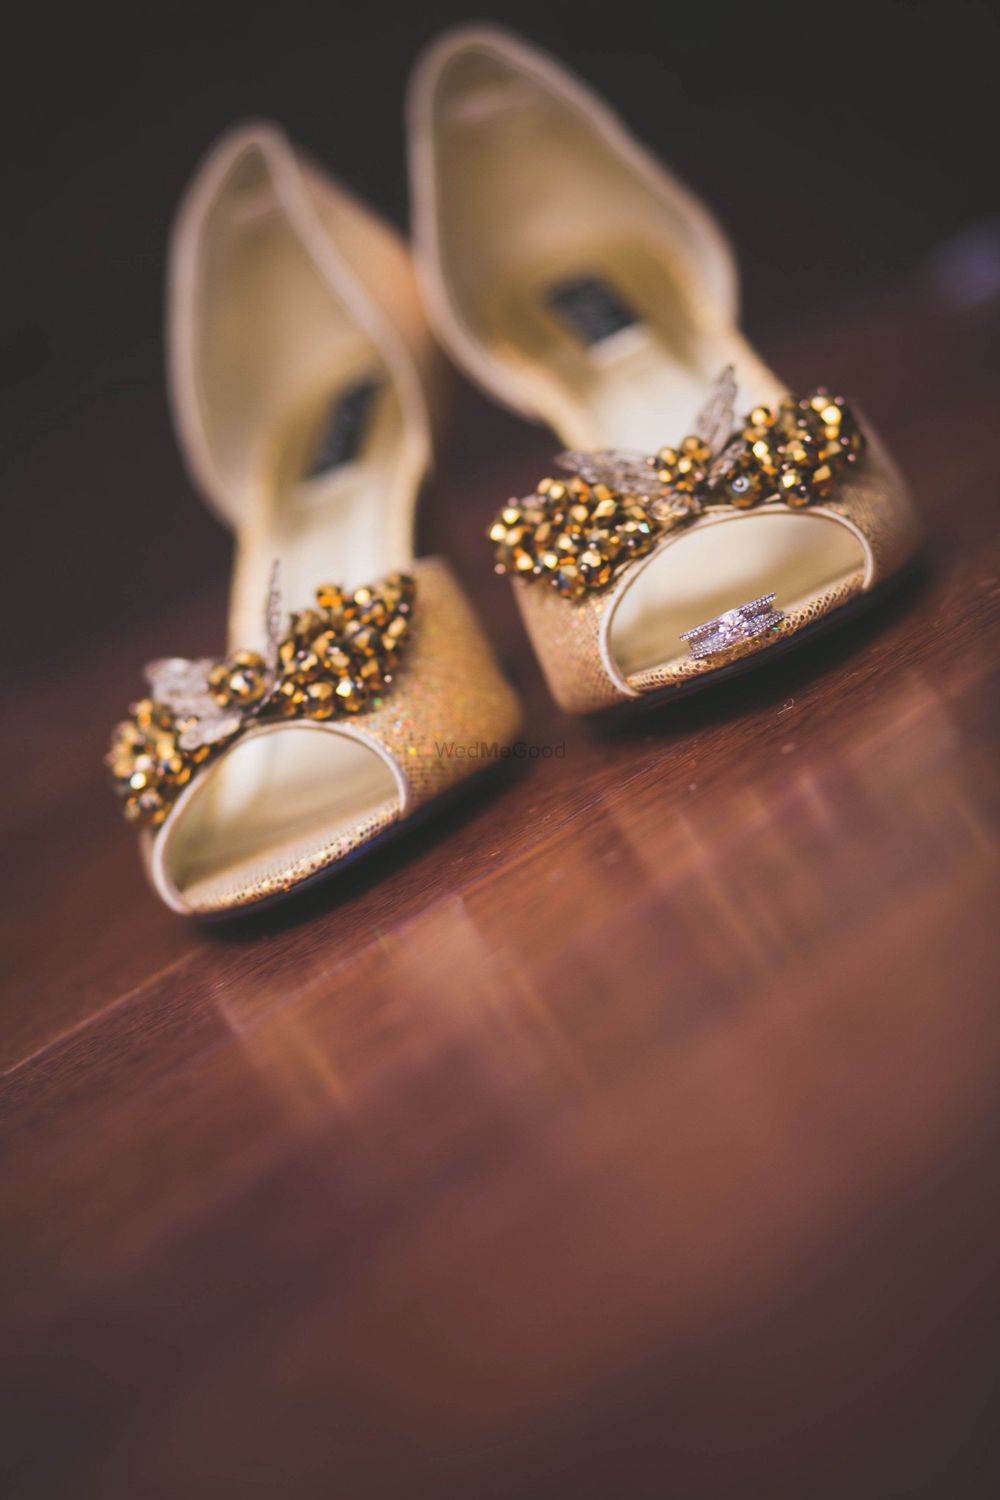 Photo of gold shoes with bows